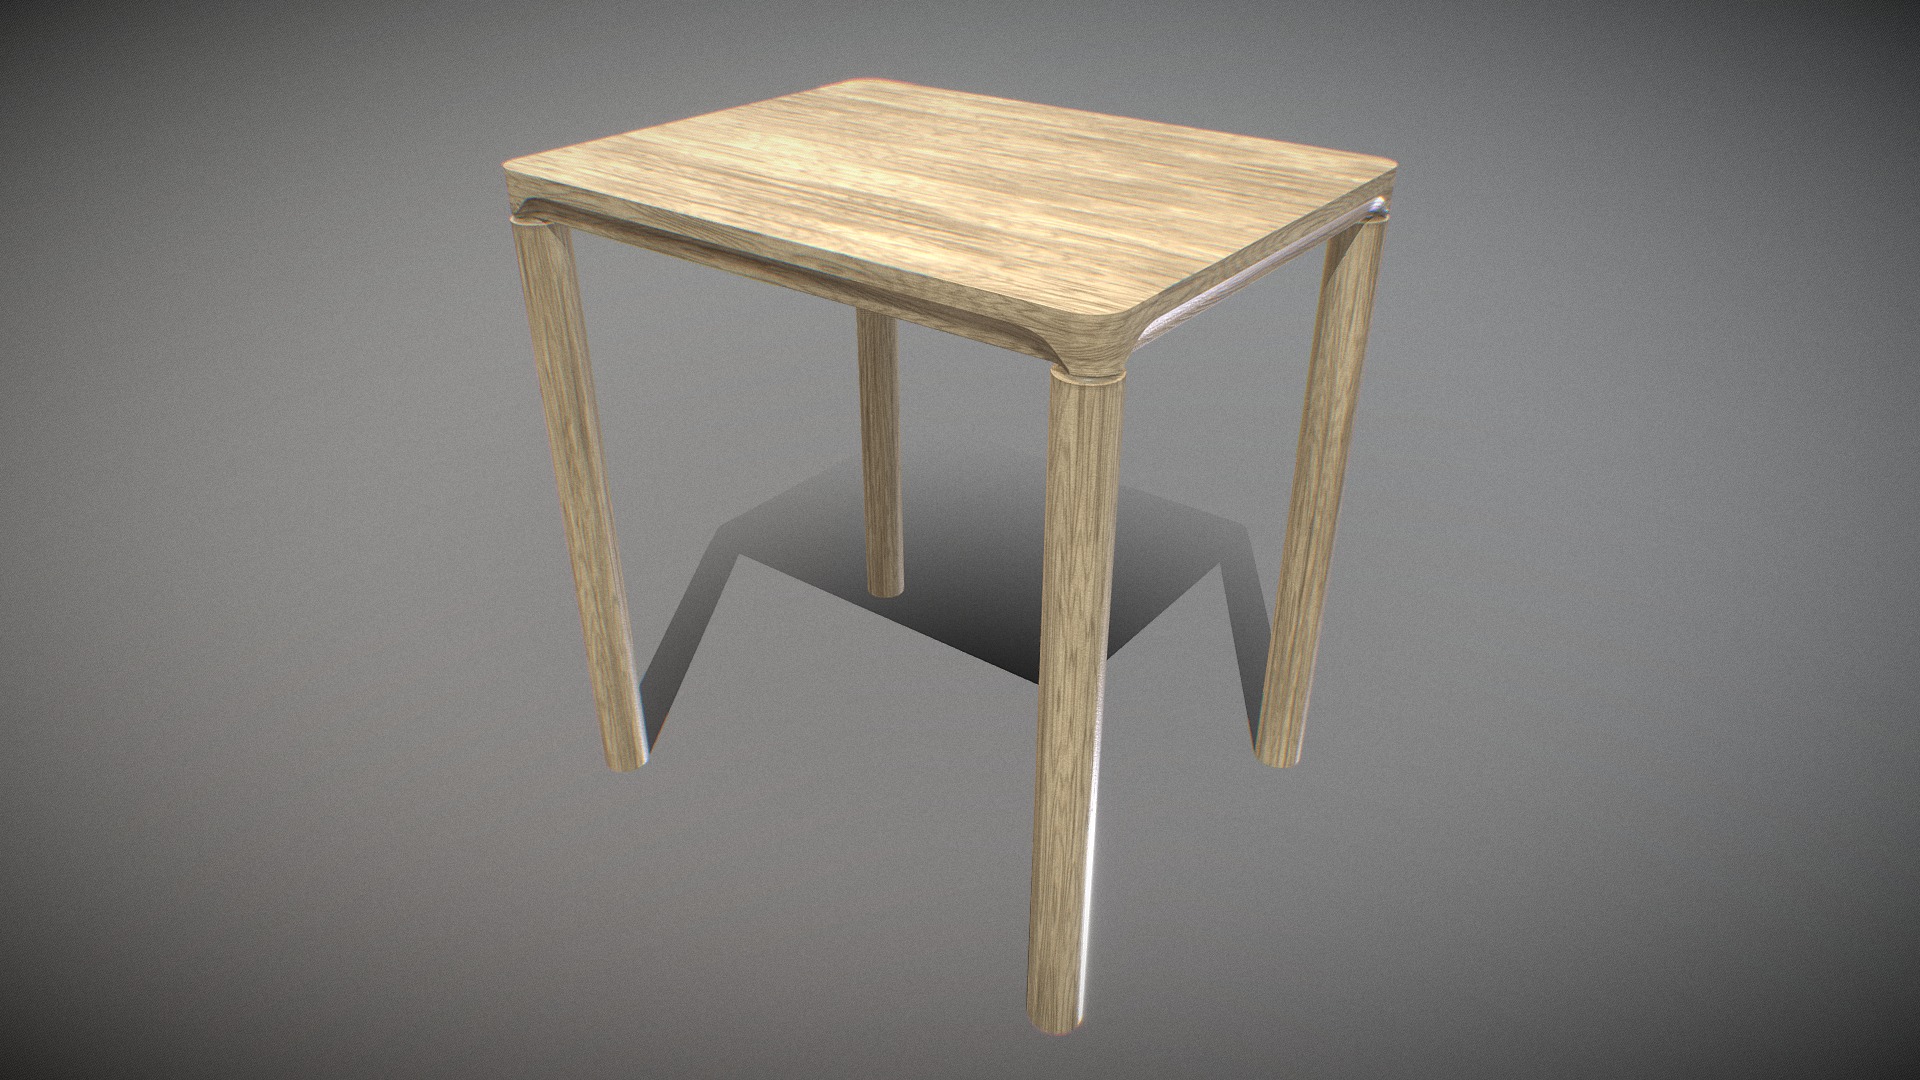 3D model Piloti Table-oak wood - This is a 3D model of the Piloti Table-oak wood. The 3D model is about a wooden chair on a grey background.